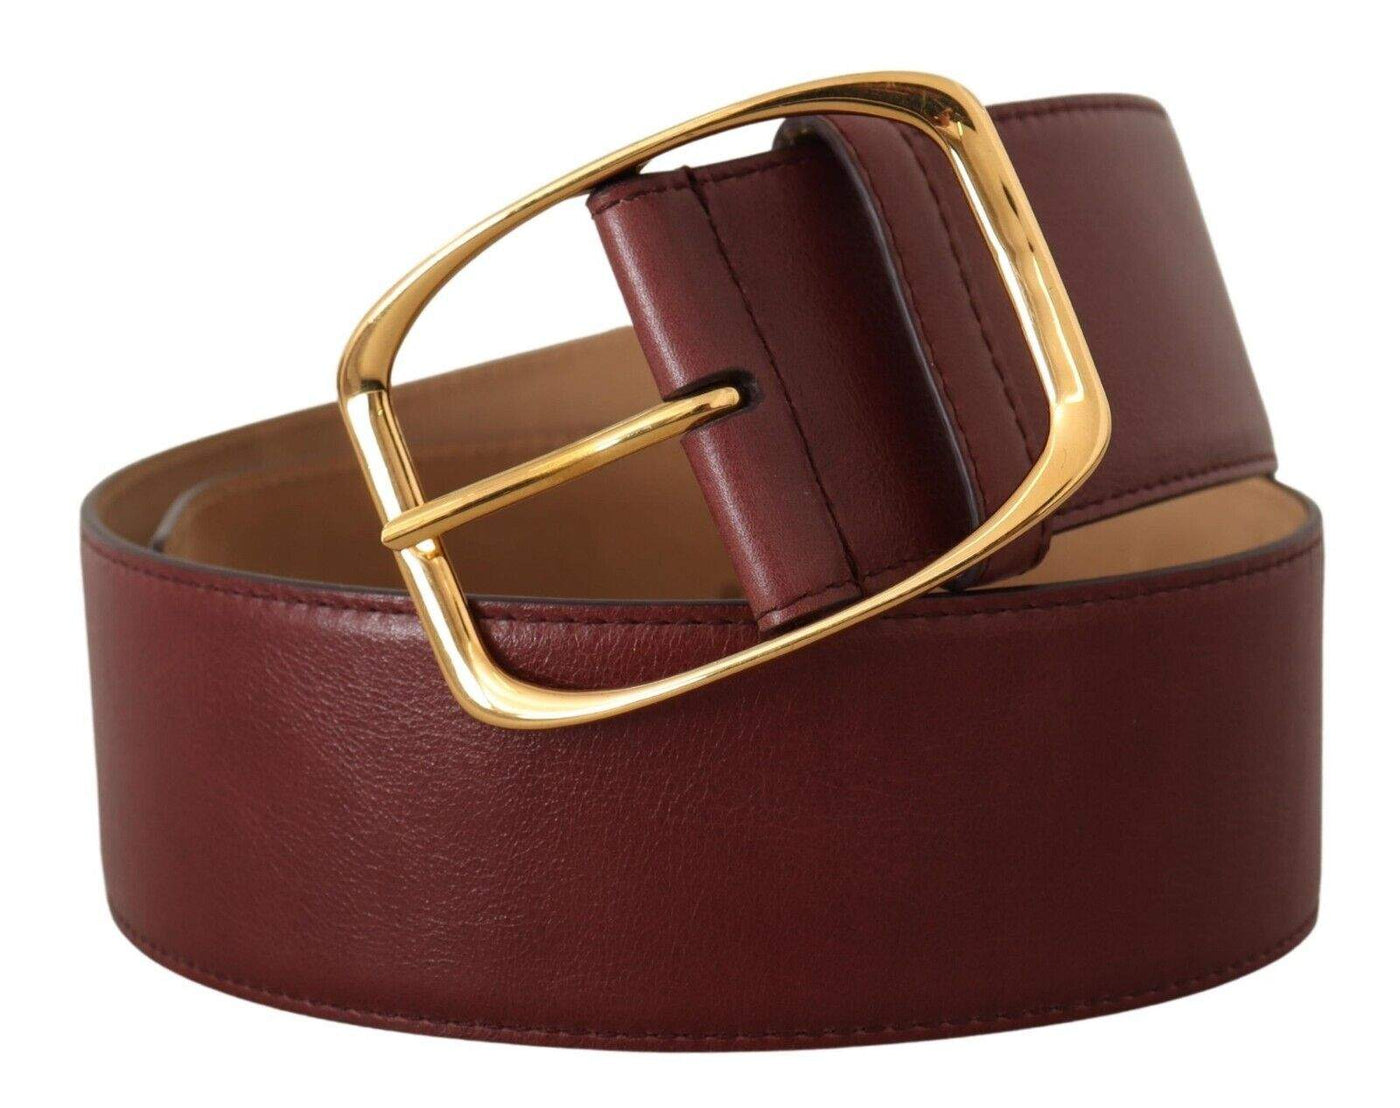 Dolce & Gabbana Maroon Leather Gold Metal Square Buckle Belt 75 cm / 30 Inches, Belts - Women - Accessories, Dolce & Gabbana, feed-1, Marrone at SEYMAYKA